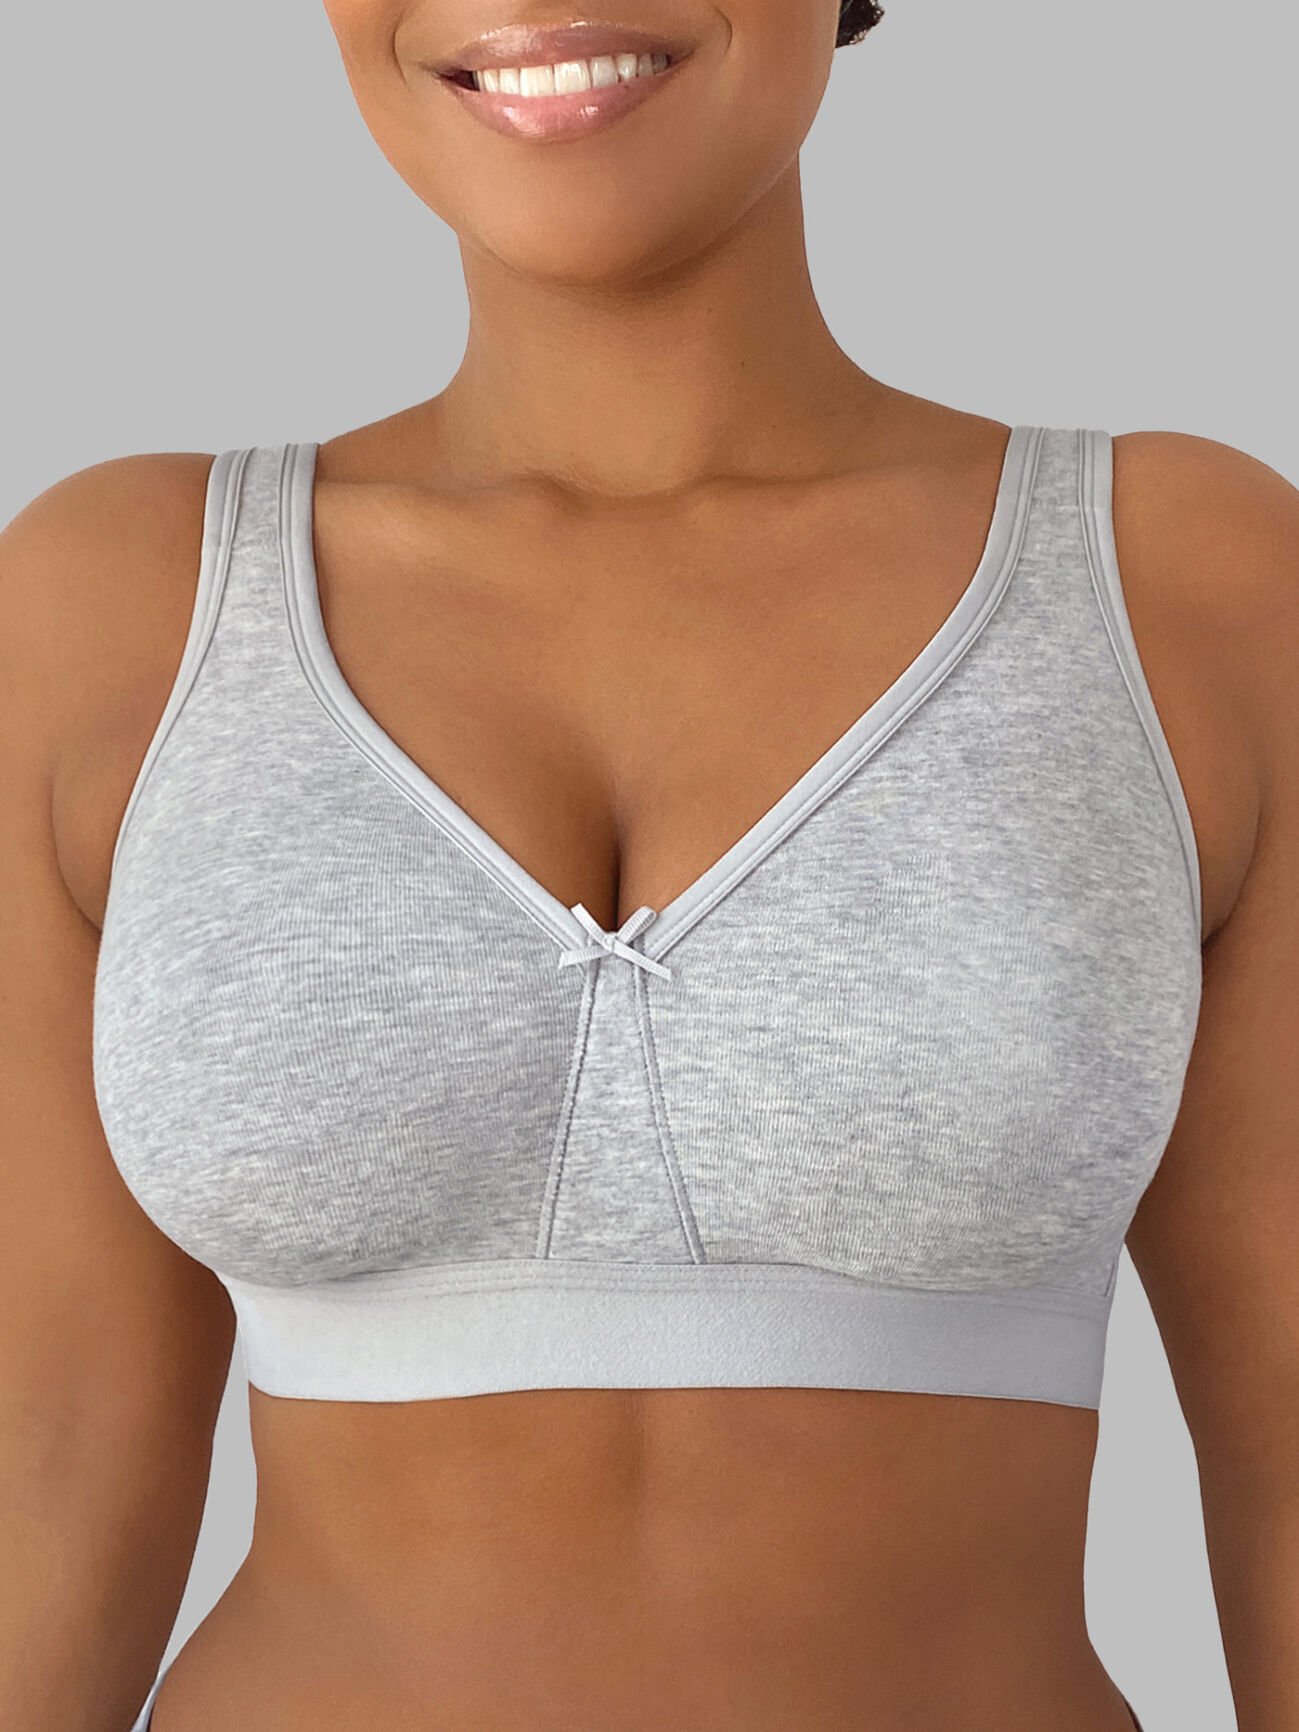 Buy Okus Seamless Non-Wired Bra with Non-Removable Pads Online